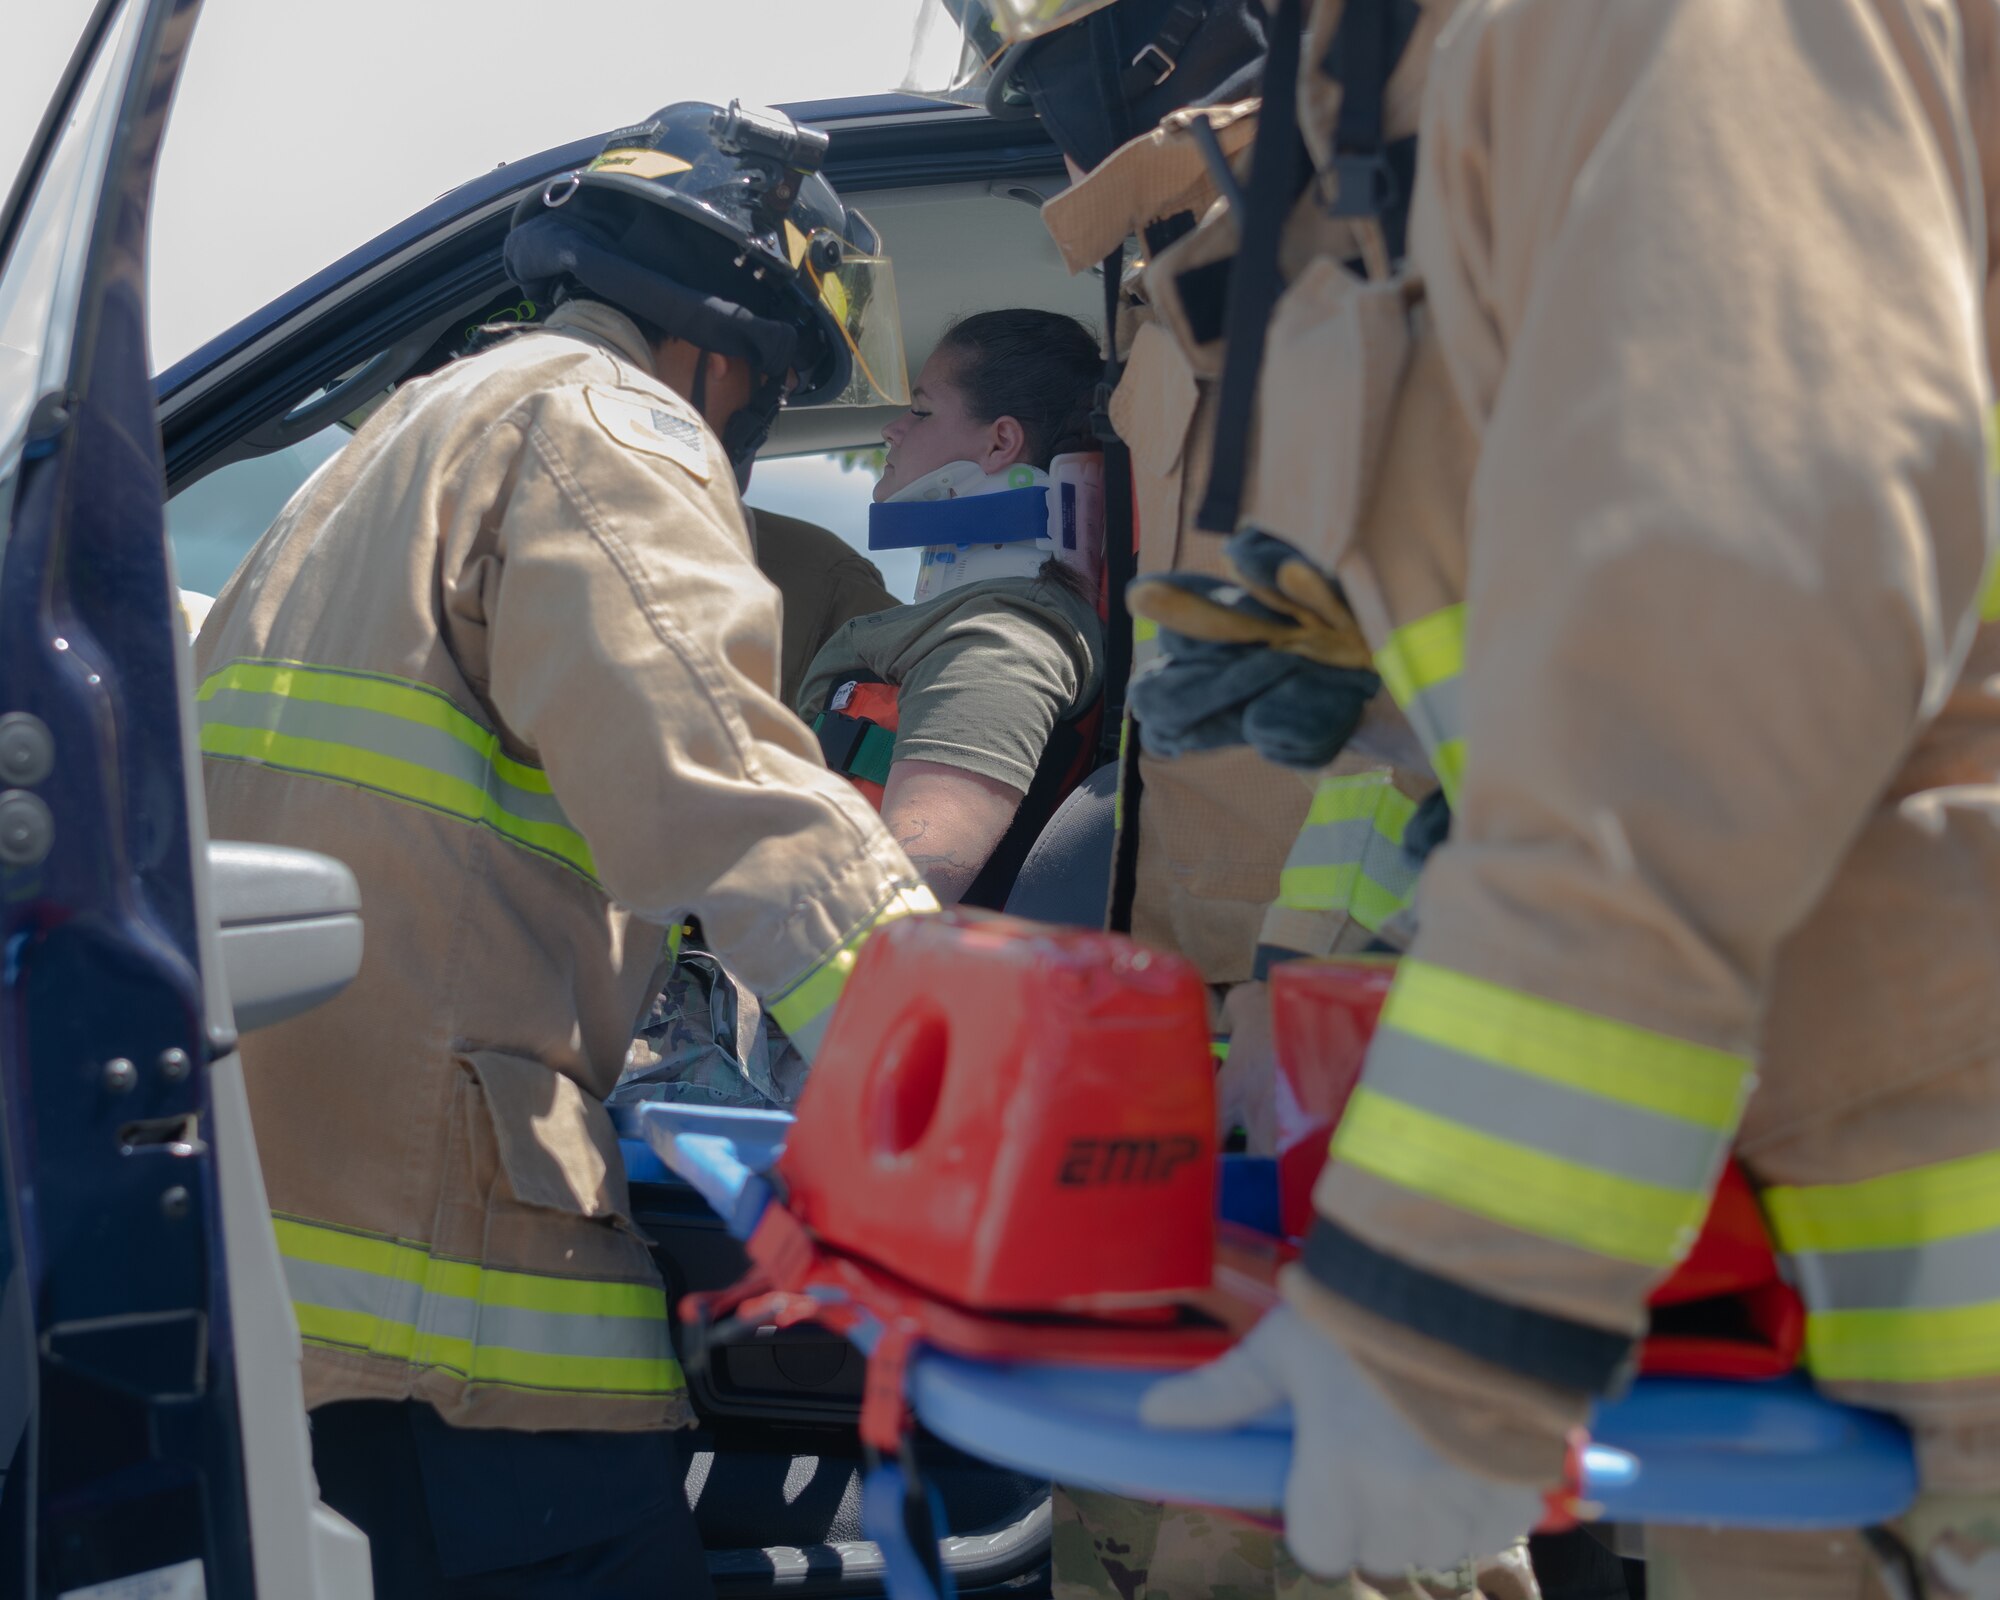 Pictures of the 18th CEF conducting vehicle extrication training on a simulated patient.